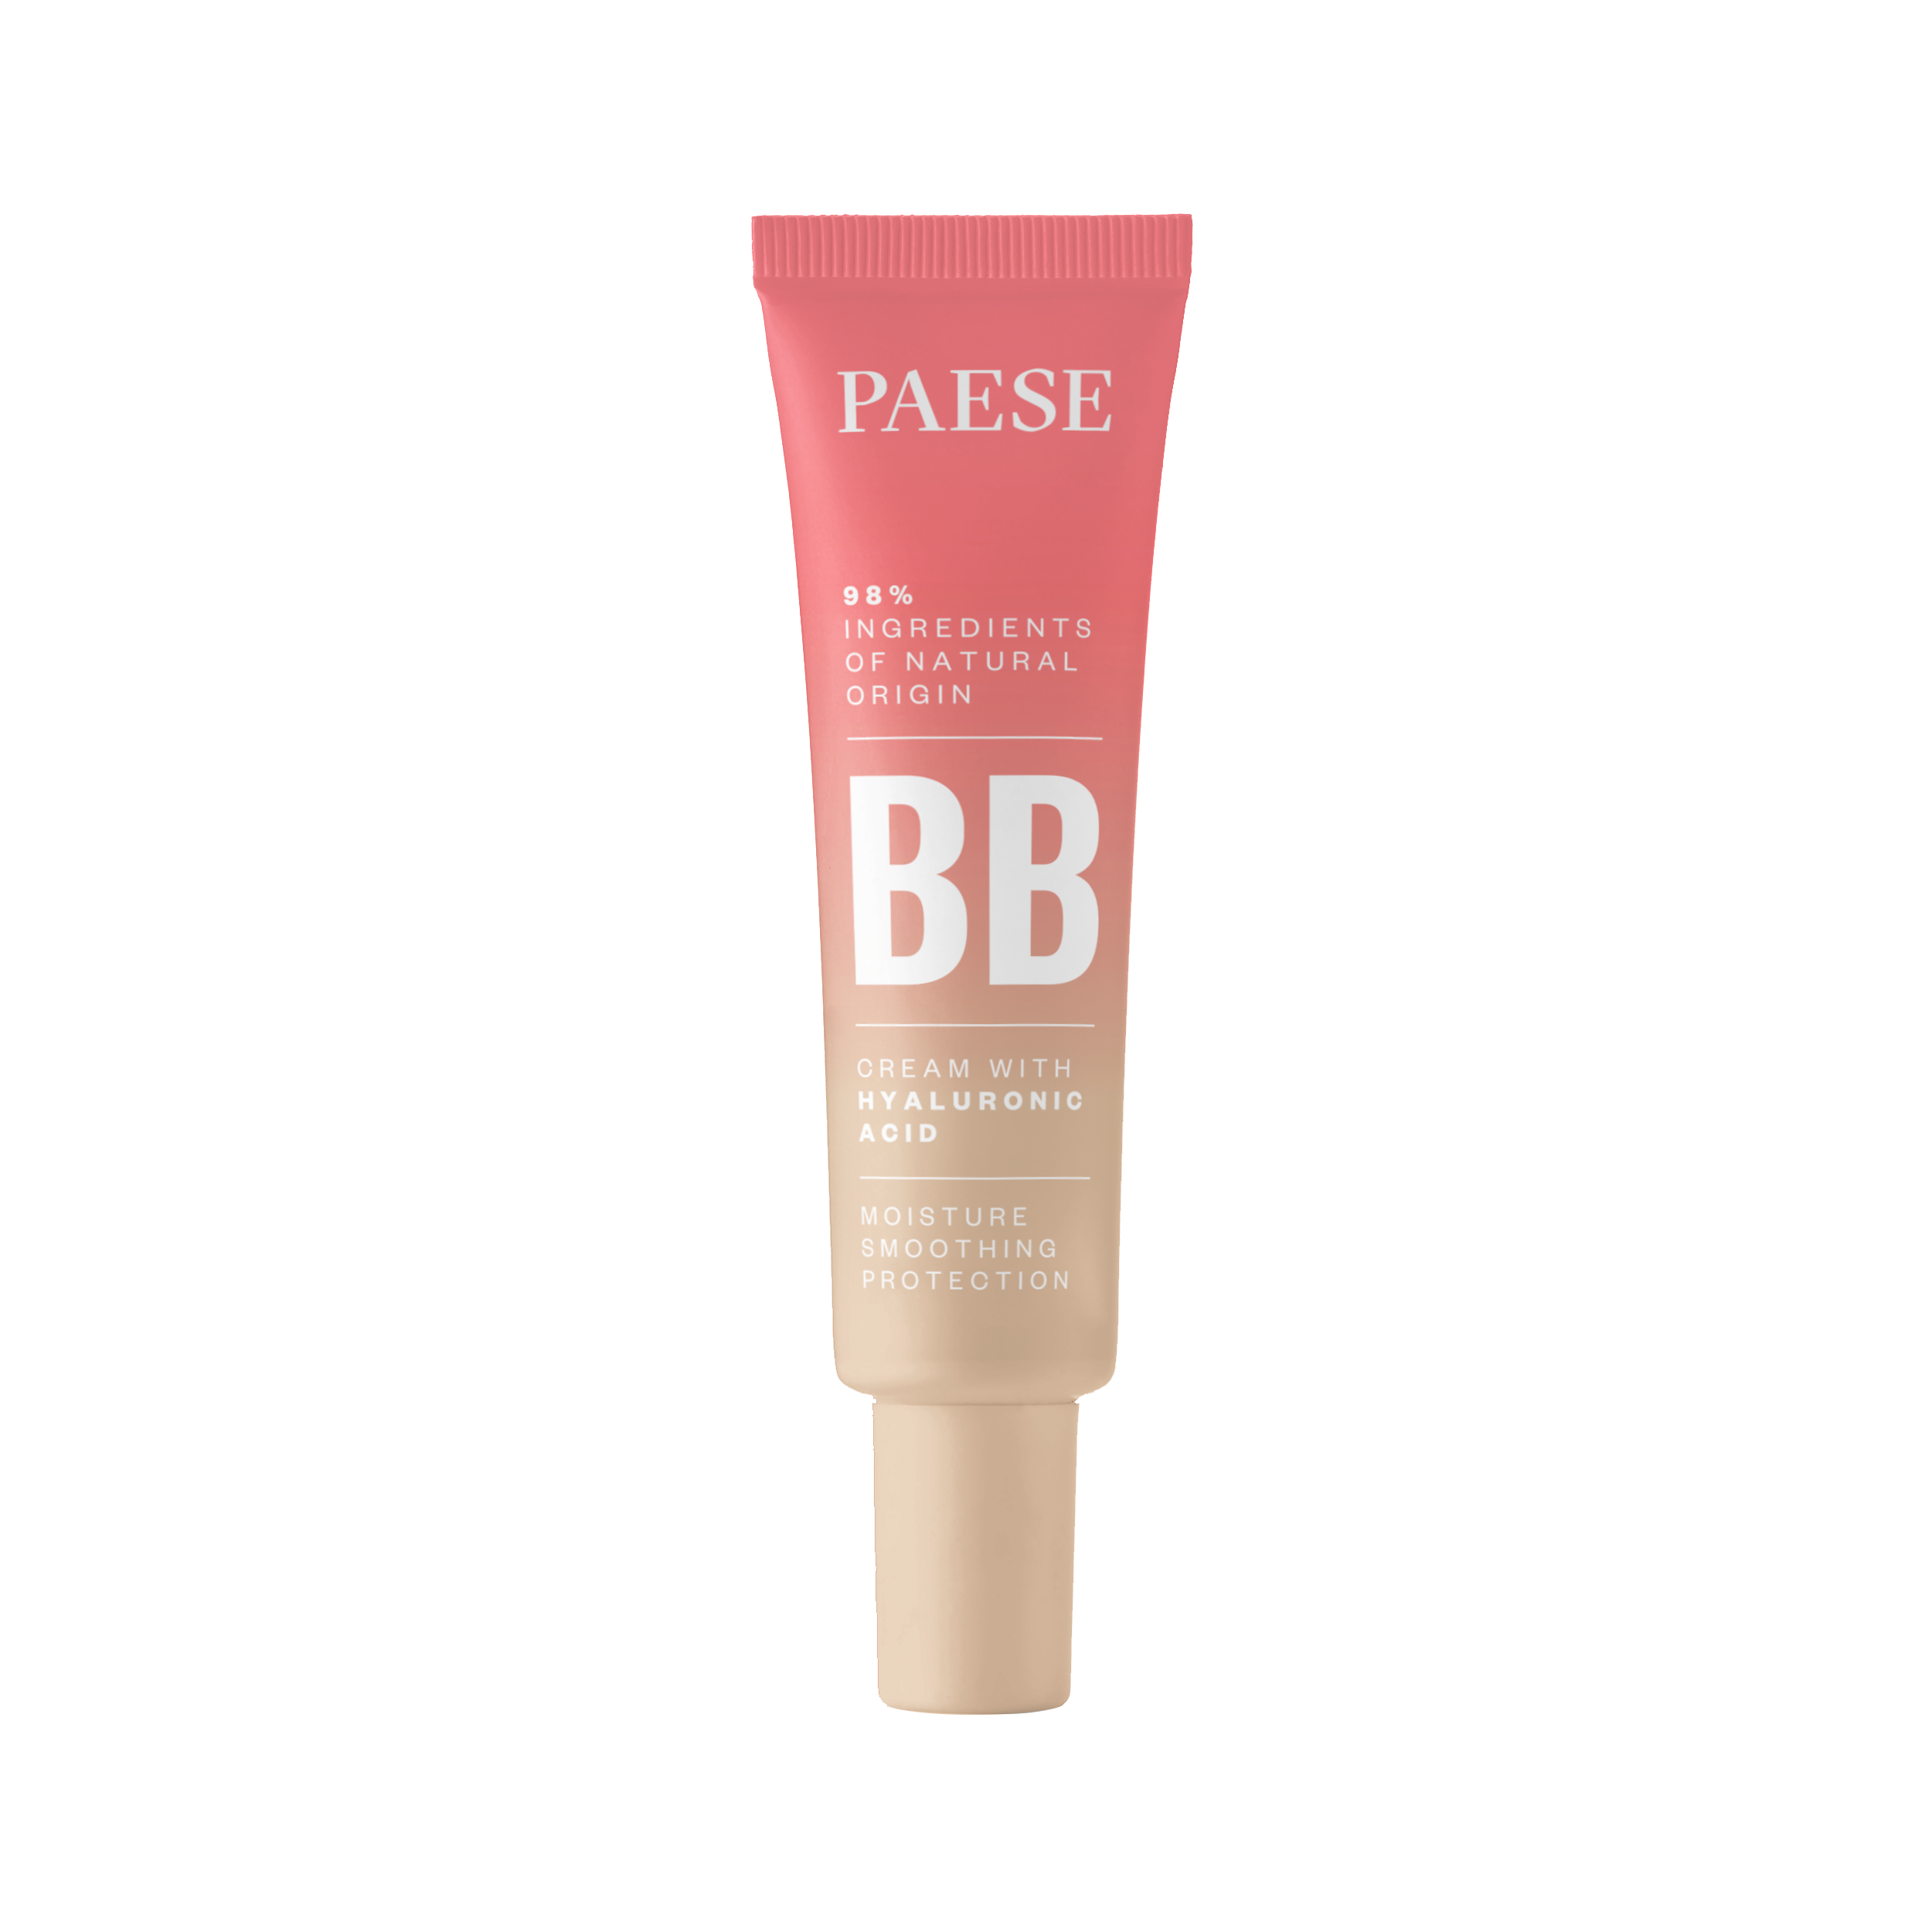 BB Cream with hyaluronic acid